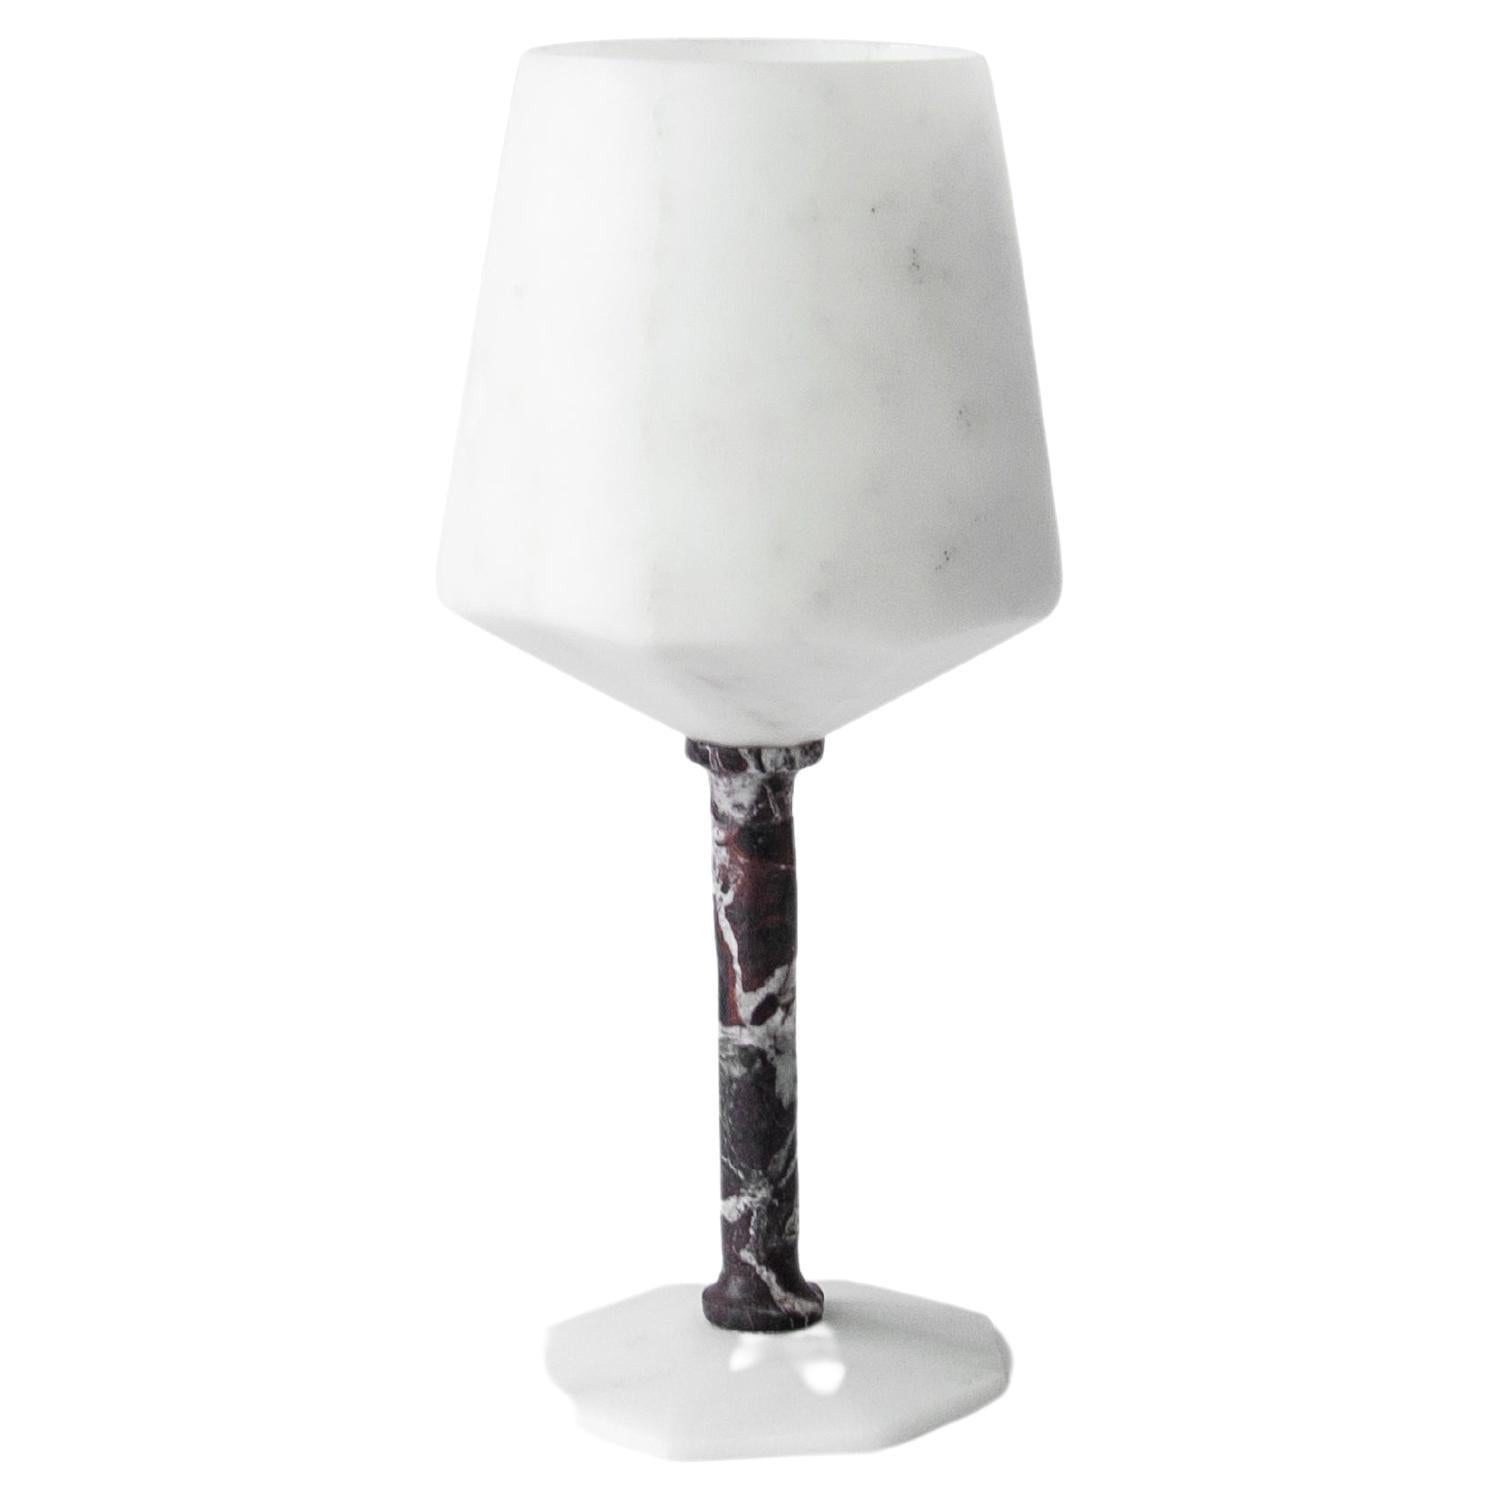 Handmade Wine Glass in Satin White Carrara and Red Levanto Marble For Sale